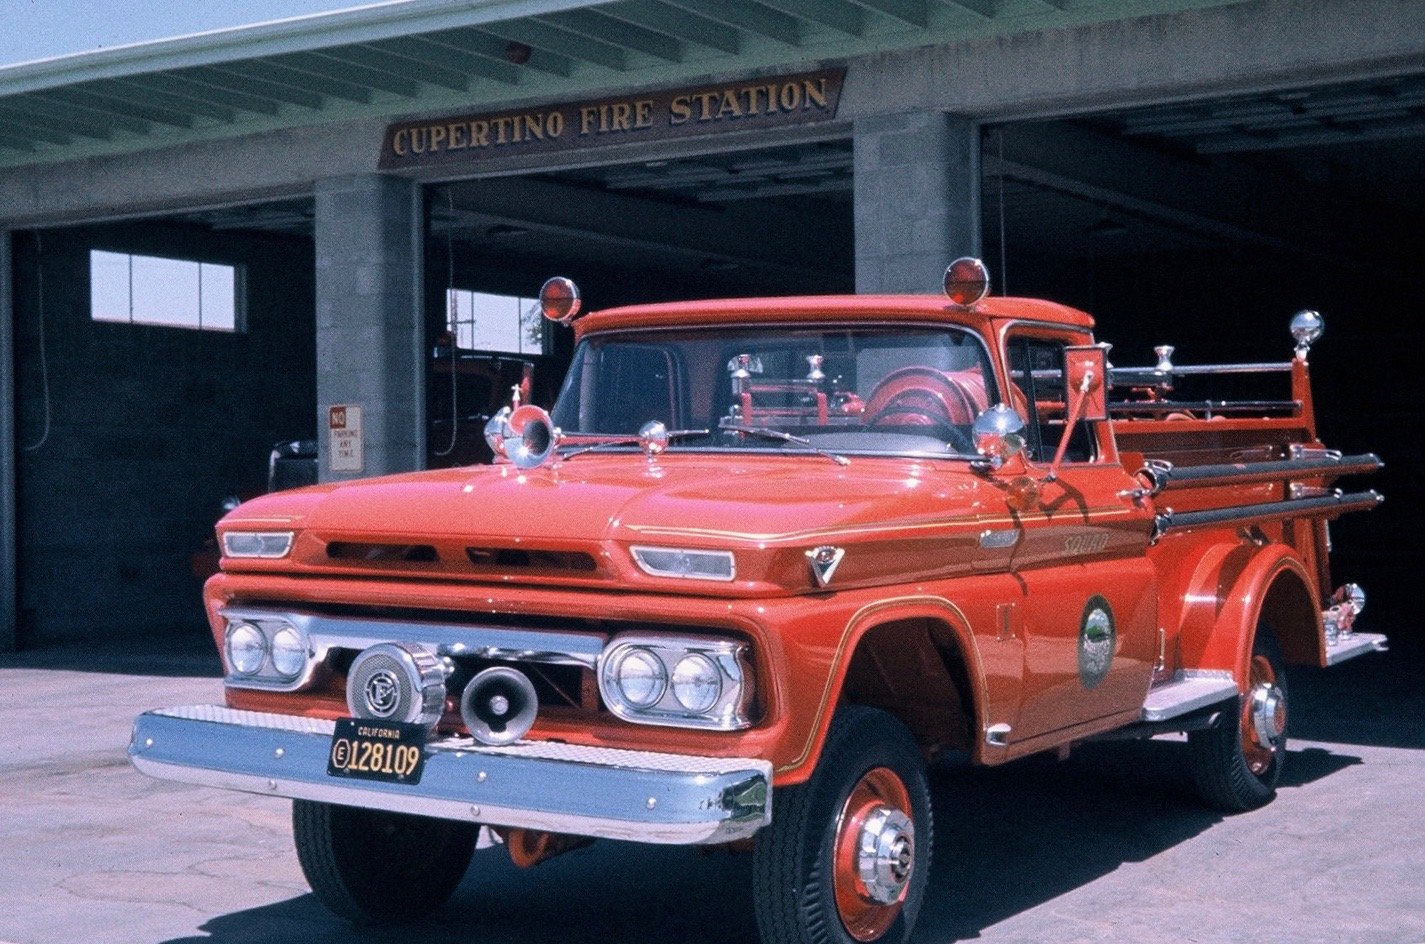 Historical Fire Apparatus Comes Home to Santa Clara County Fire Department